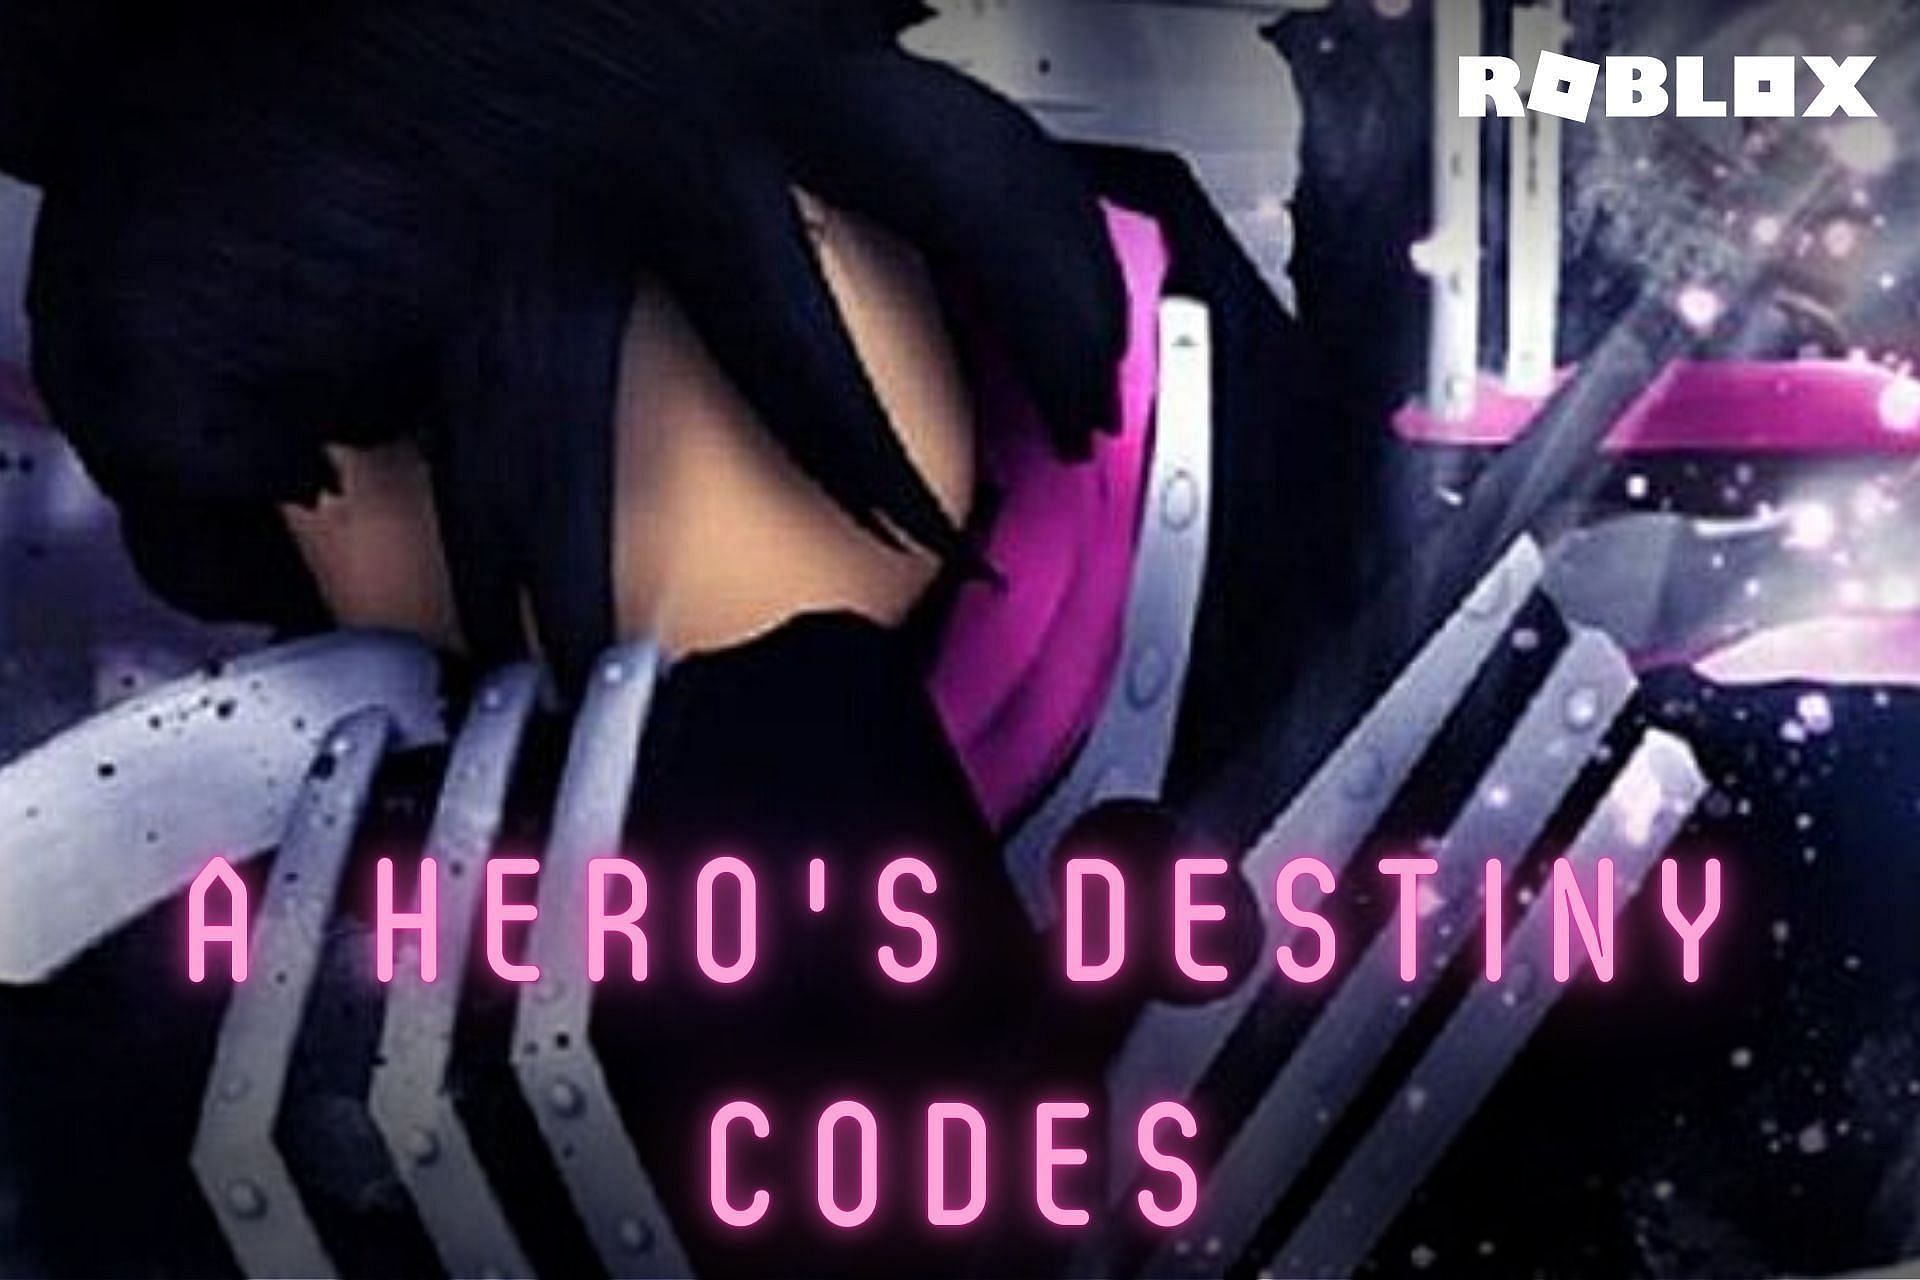 Roblox A Hero's Destiny codes (January 2023) Free Spins, Boost, and more